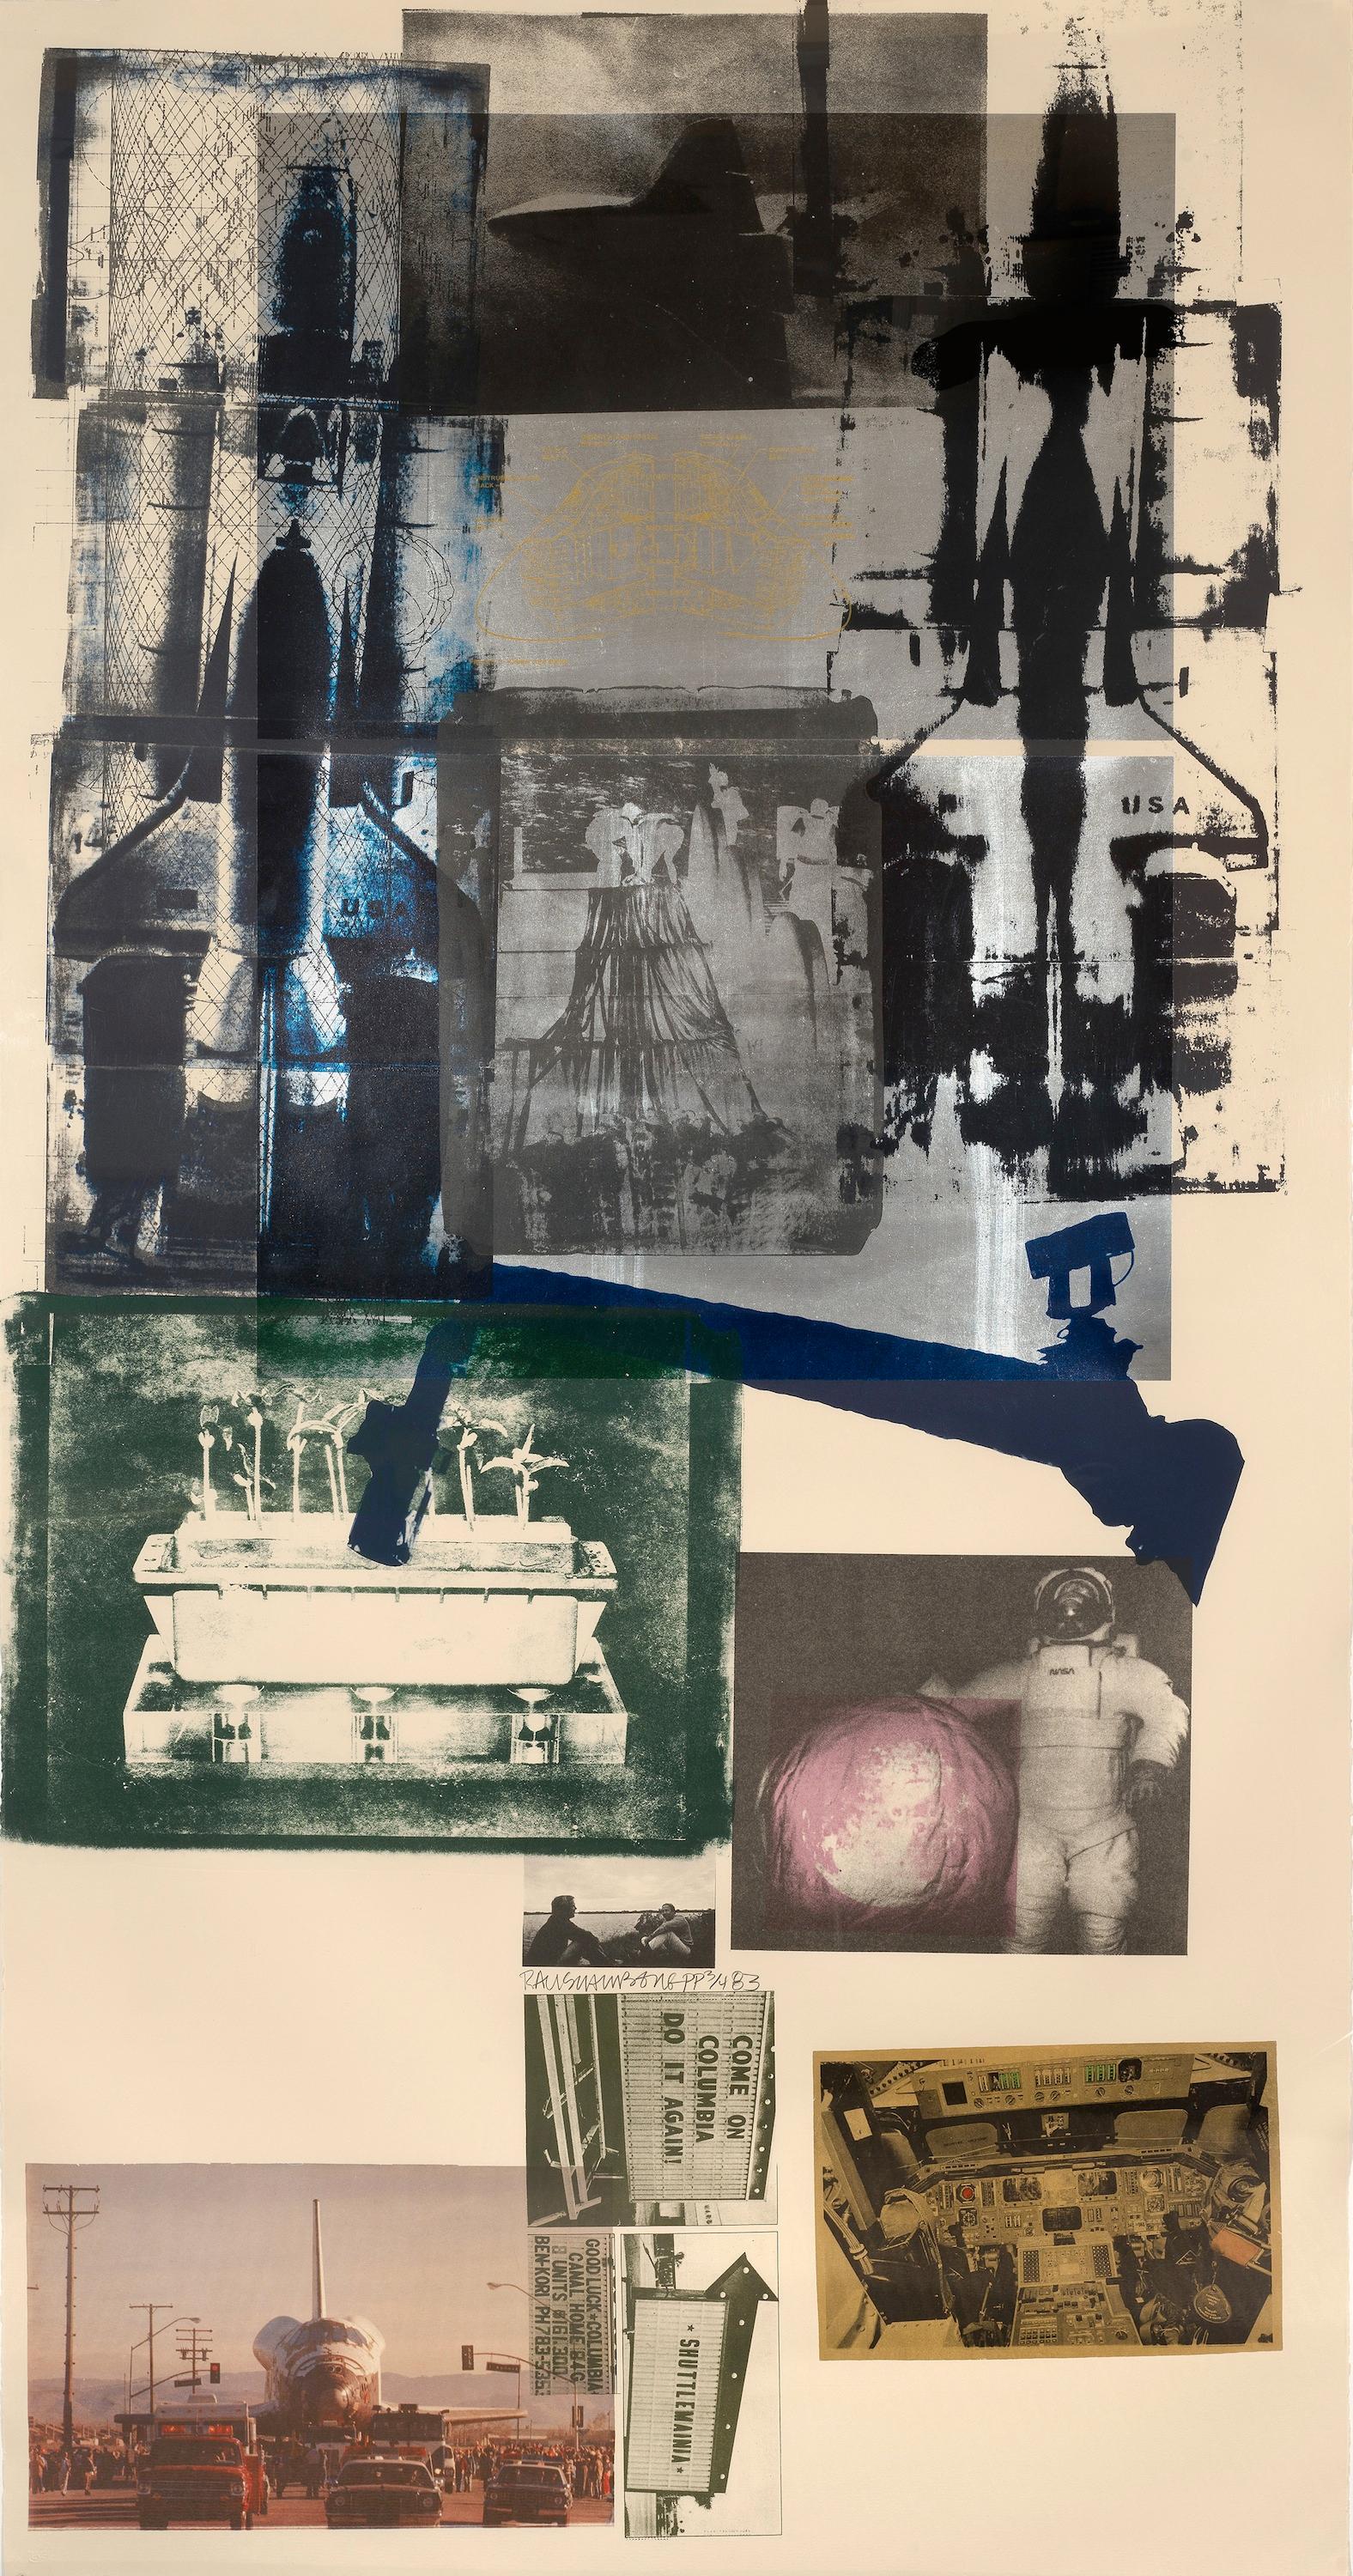 This Post- Modern, lithograph work by Robert Rauschenberg, depicts the American space age. Featuring various elements of space travel and flight, the collage shows true American technology and culture. This work is edition 12 of 29.

Considered by